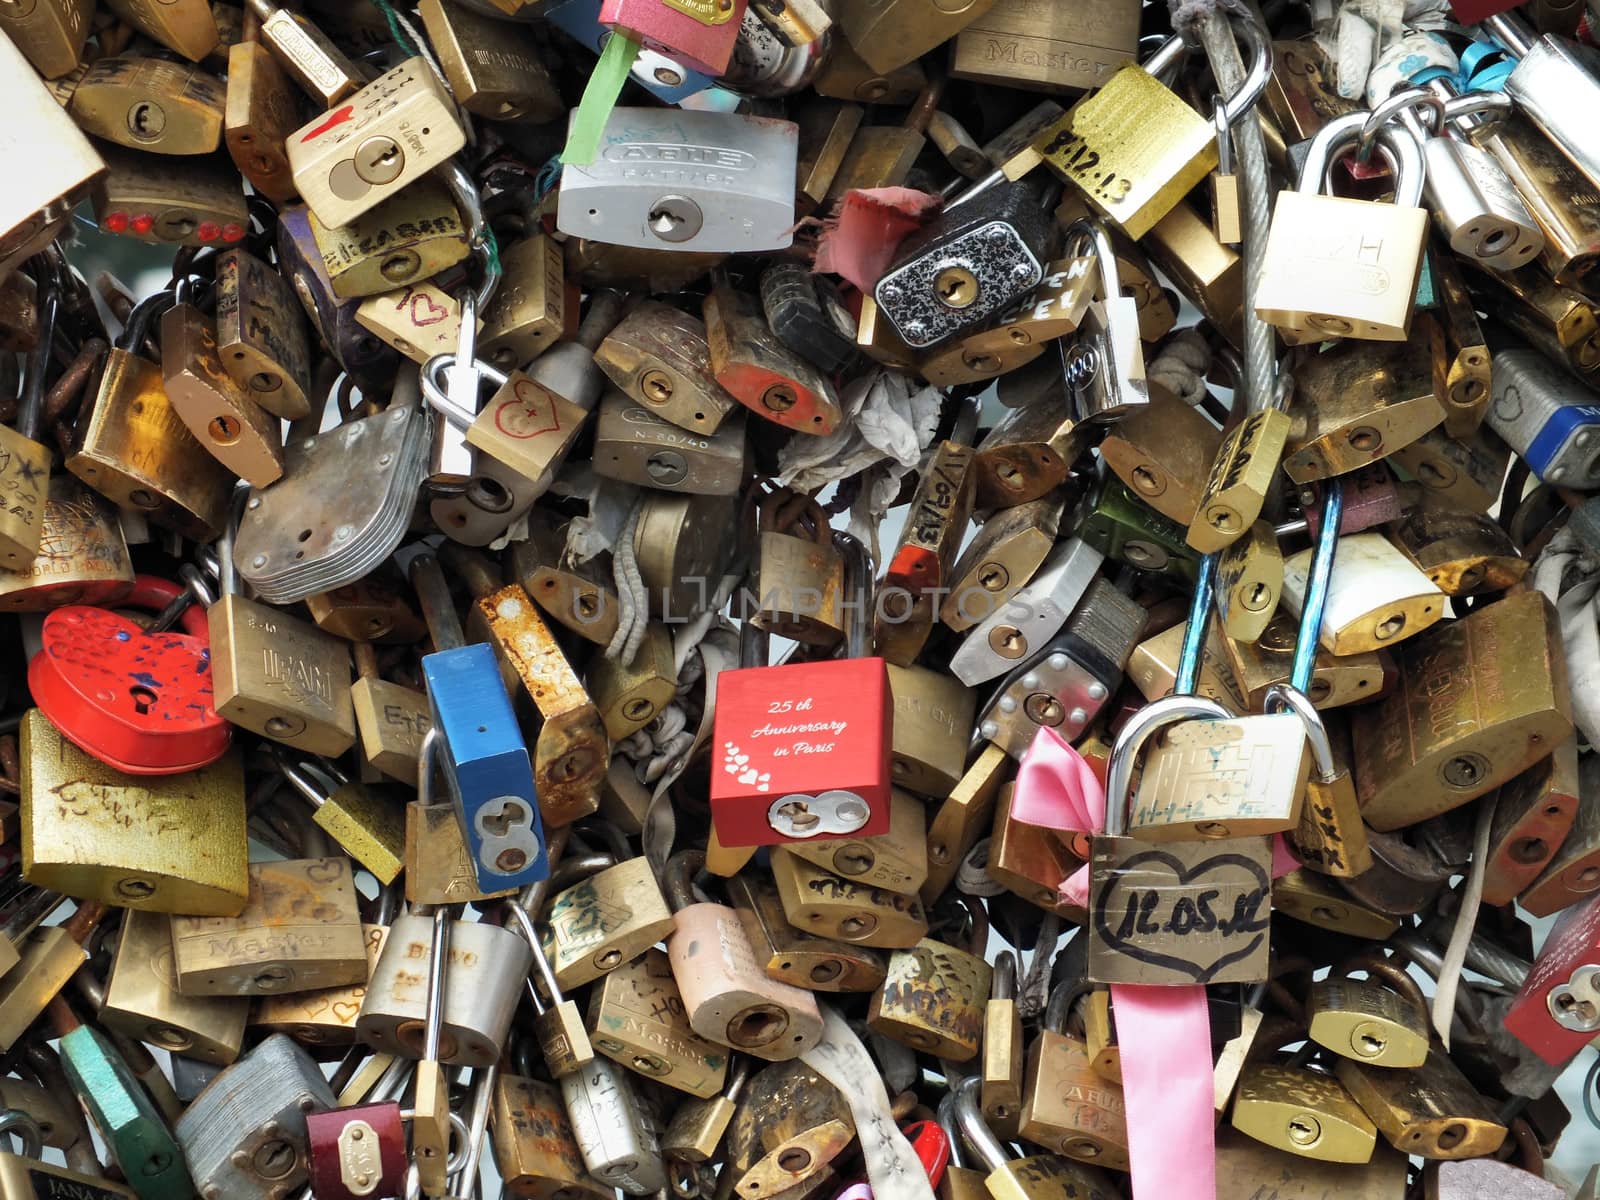 A love lock is a padlock which sweethearts lock to a bridge to symbolise their love and usually their' names or initials are inscribed on it. The key is then thrown away to symbolise unbreakable love.